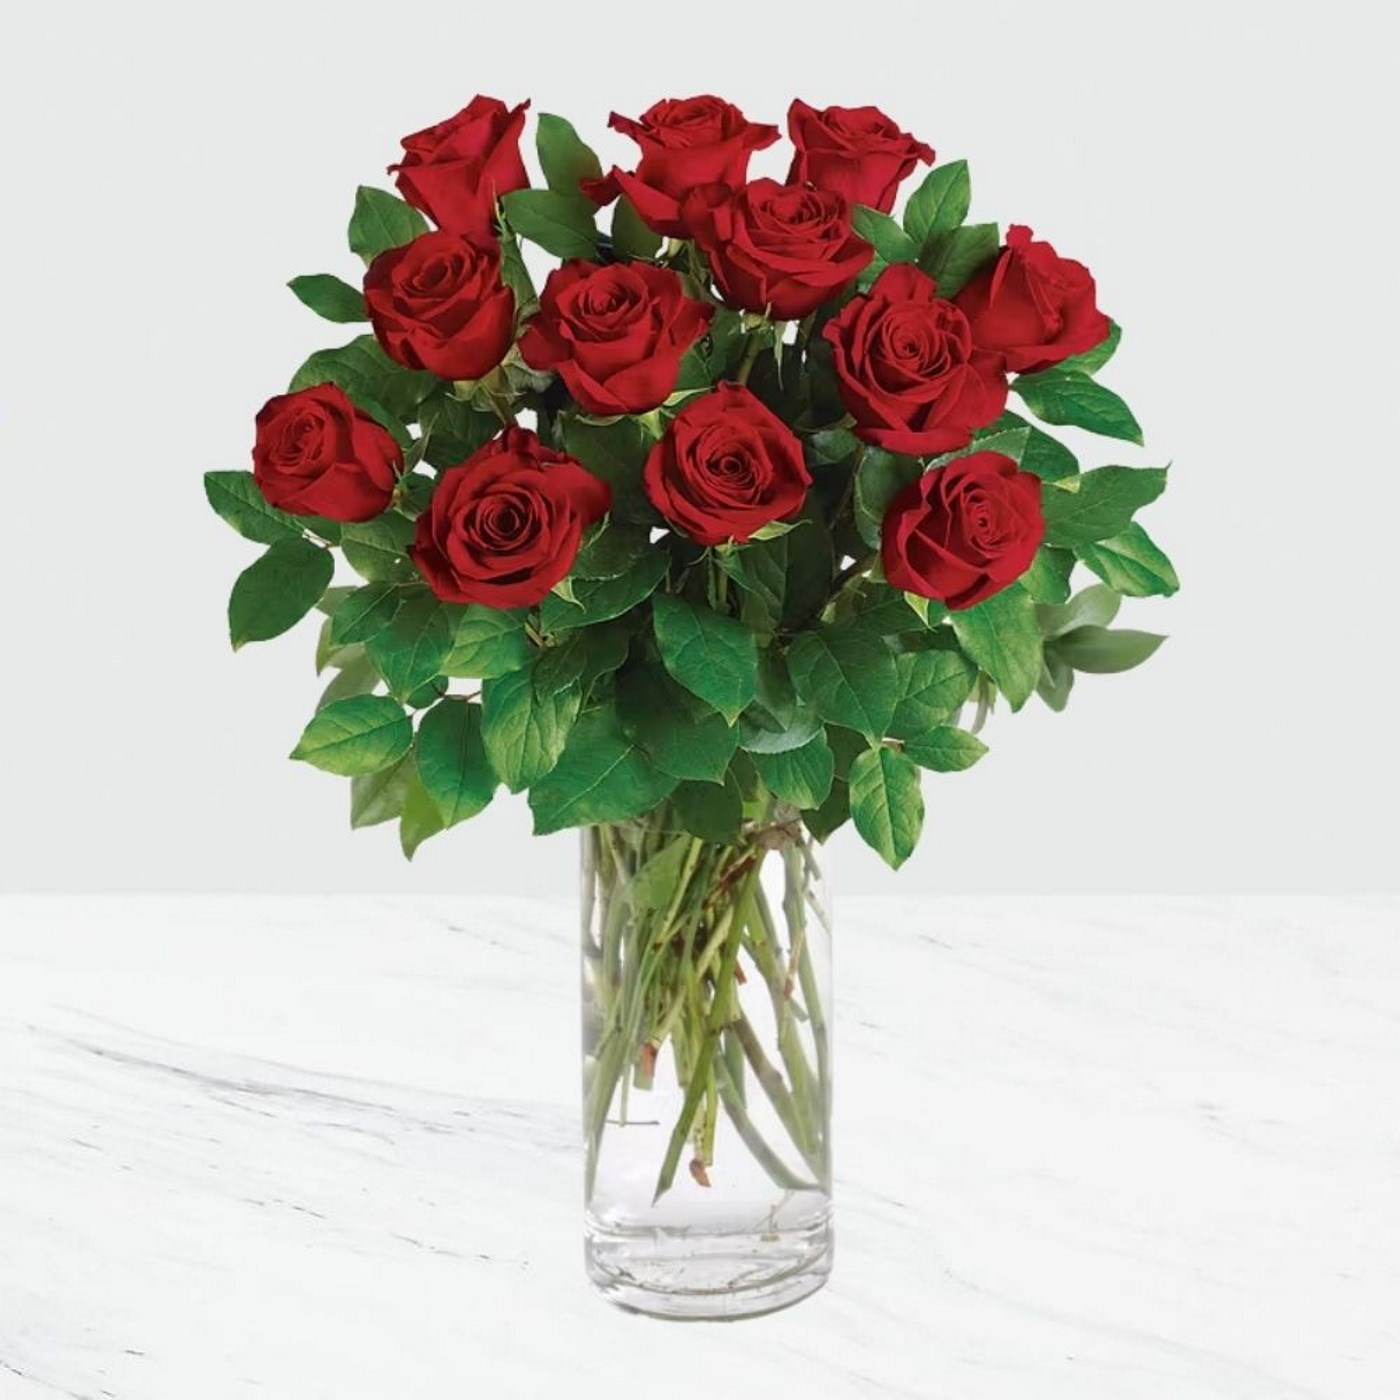 12 Red Roses In A Vase Mozambique Interflora Eesti Flower Delivery